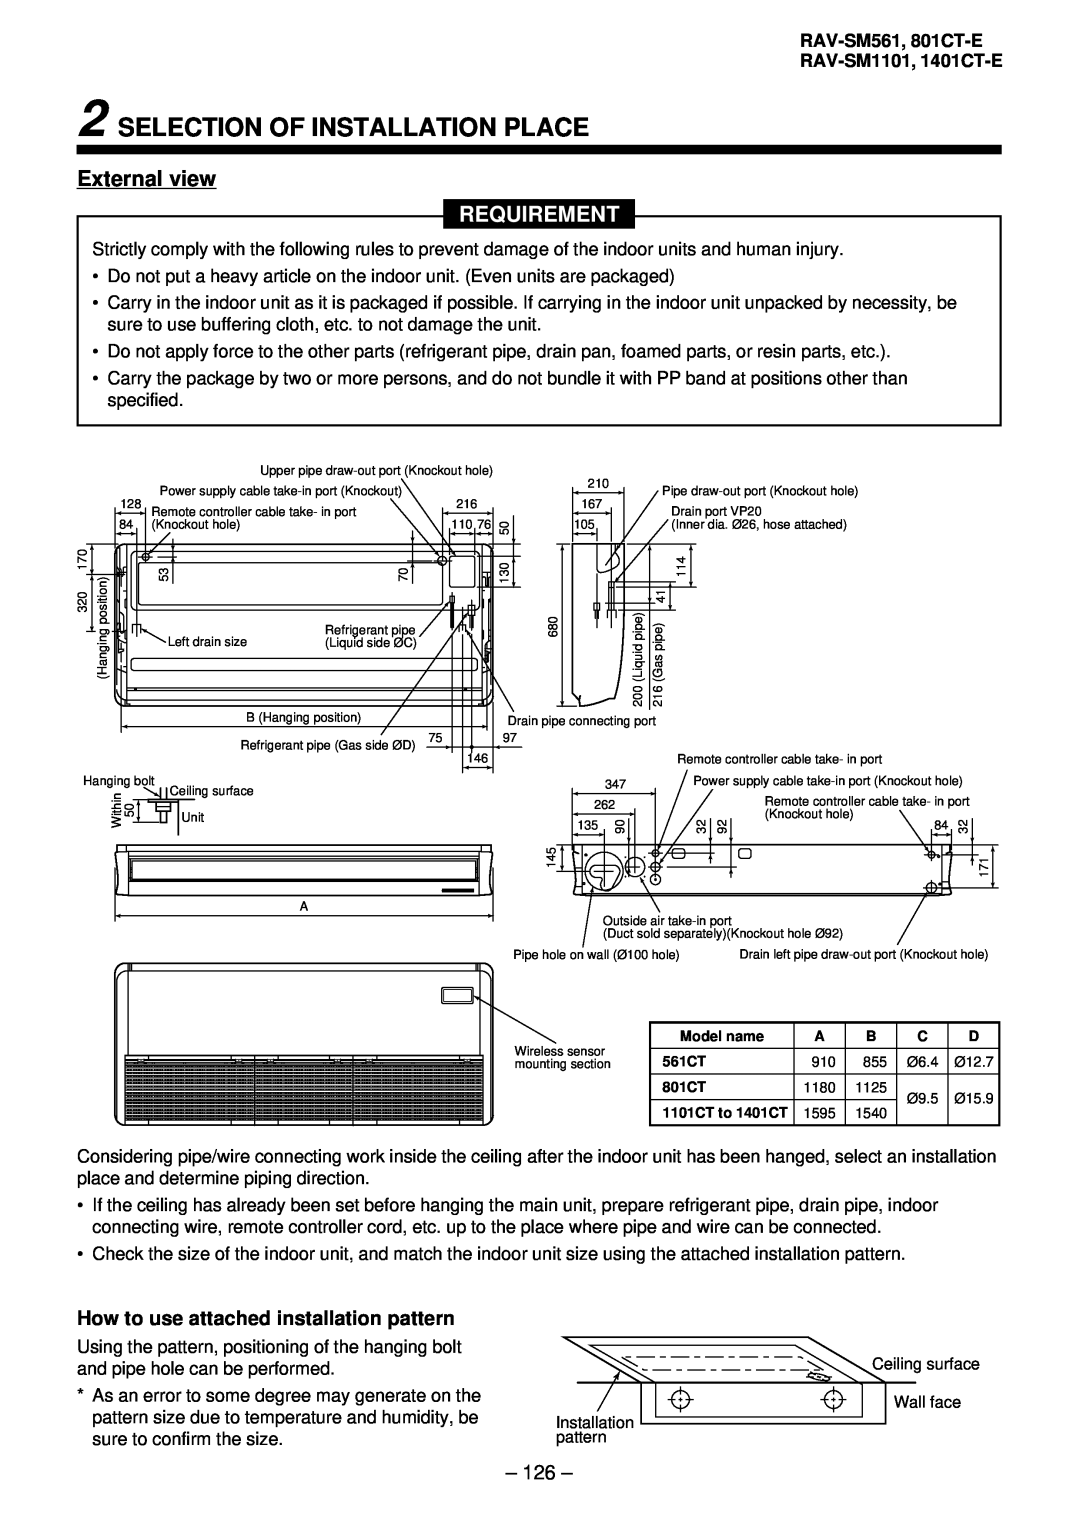 Balcar R410A Selection Of Installation Place, External view, Requirement, How to use attached installation pattern, 126 